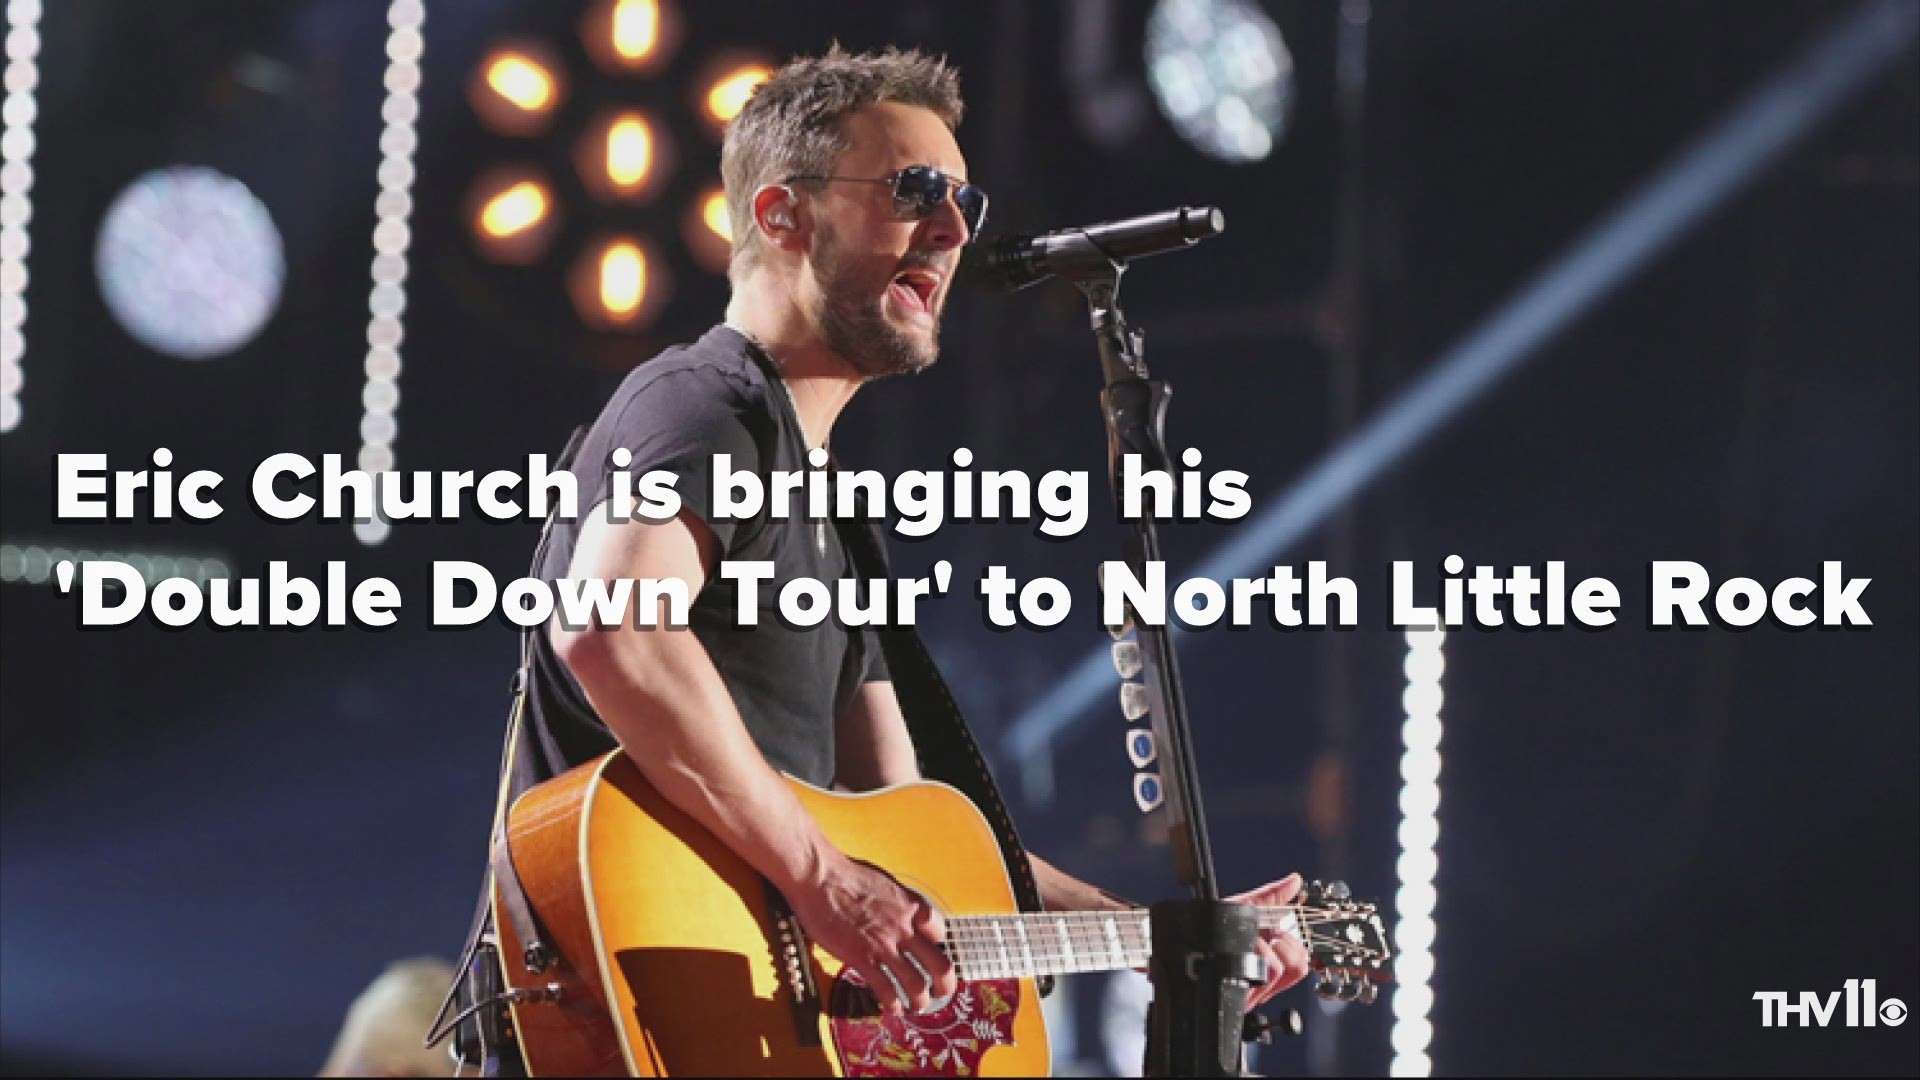 Eric Church is coming to North Little Rock.